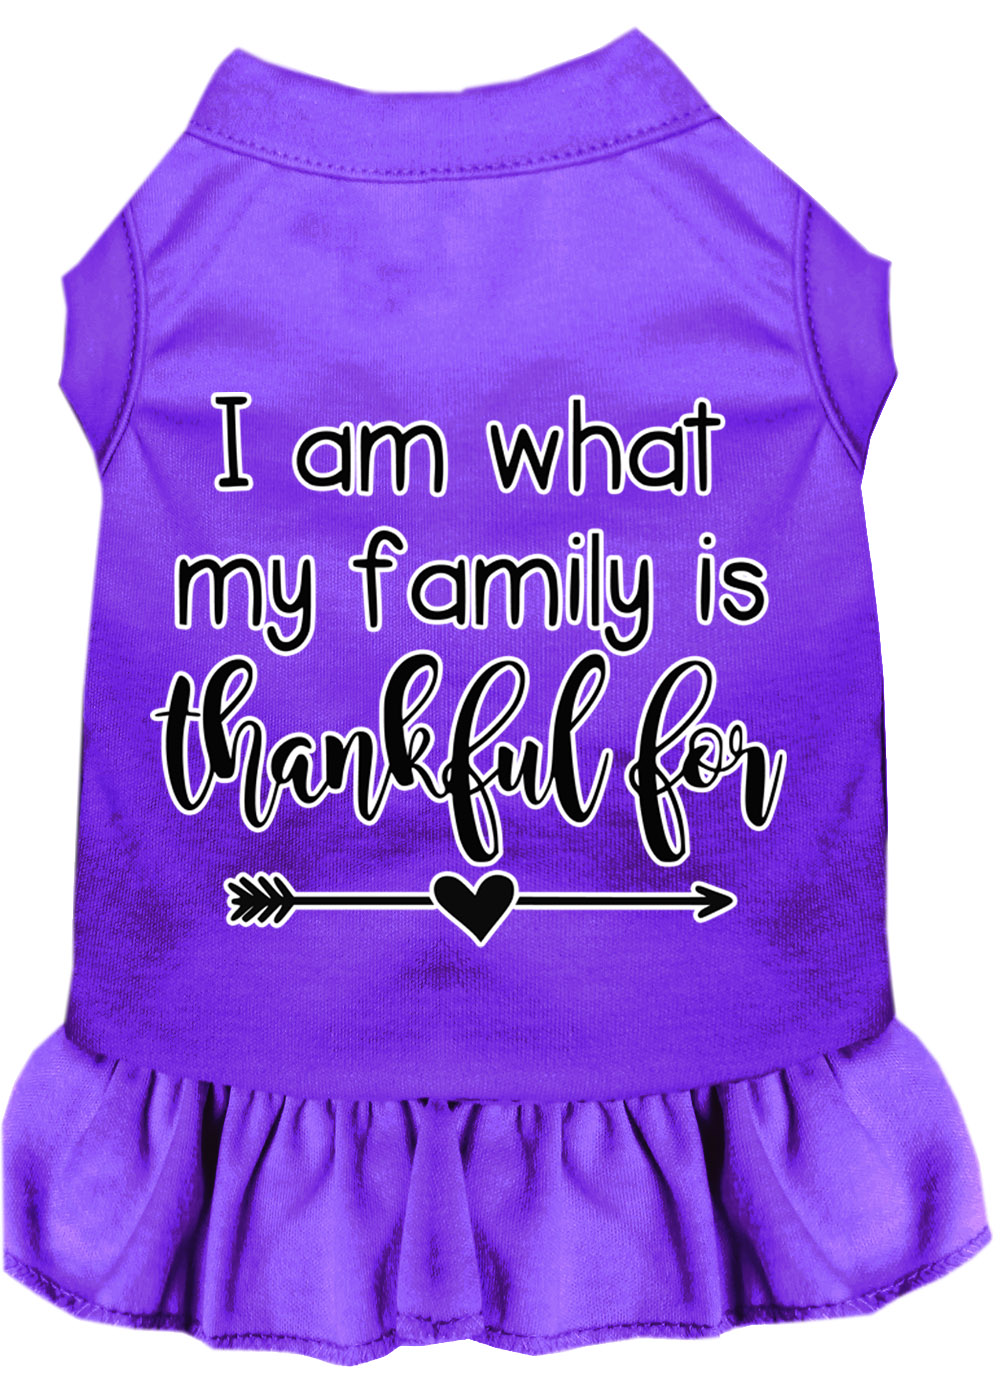 I Am What My Family is Thankful For Screen Print Dog Dress Purple 4X